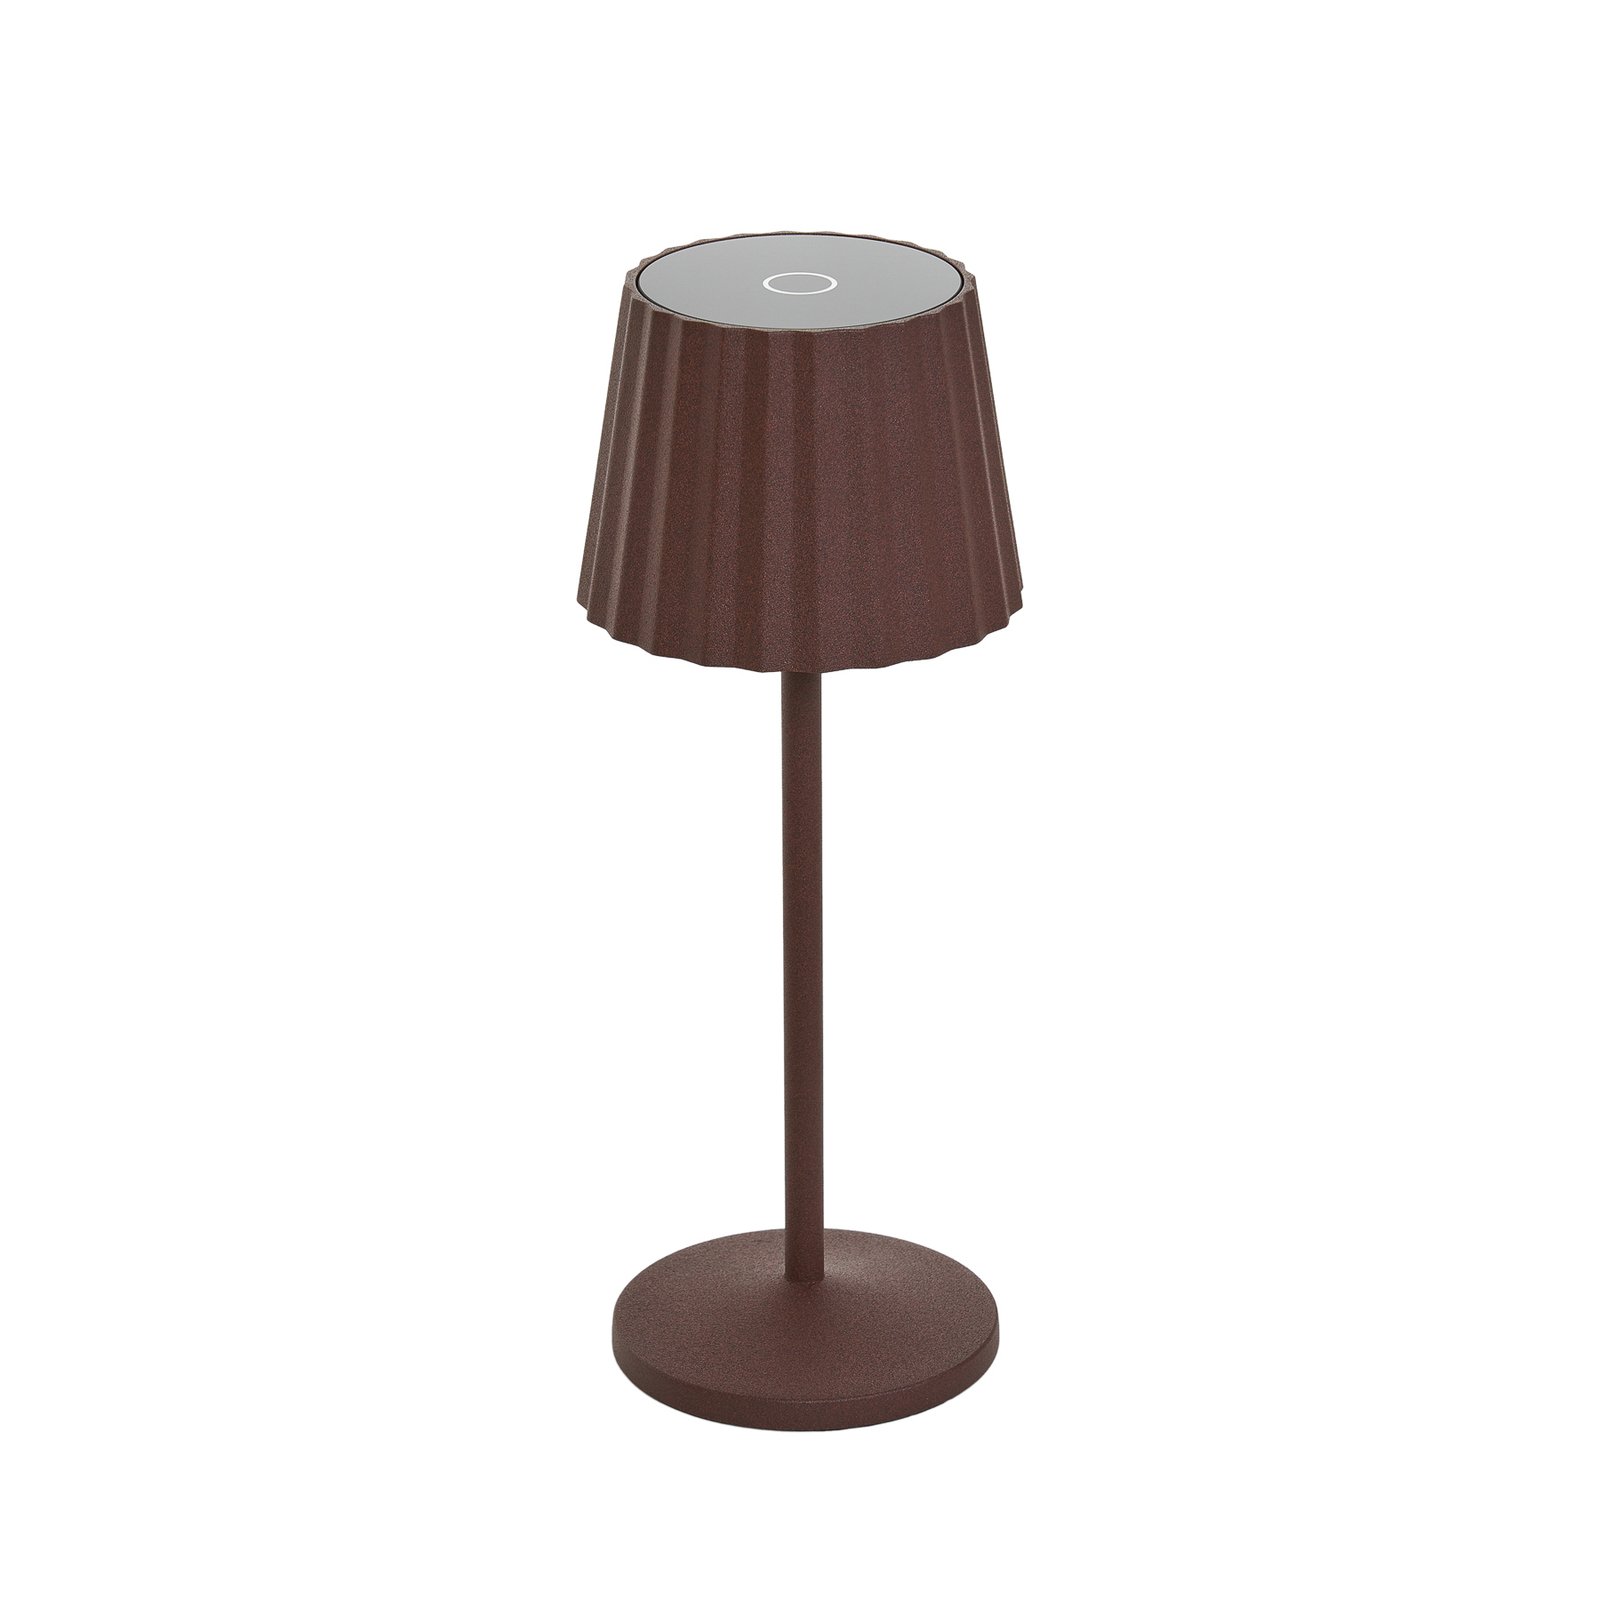 Lindby LED table lamp Esali, rust brown, set of 2